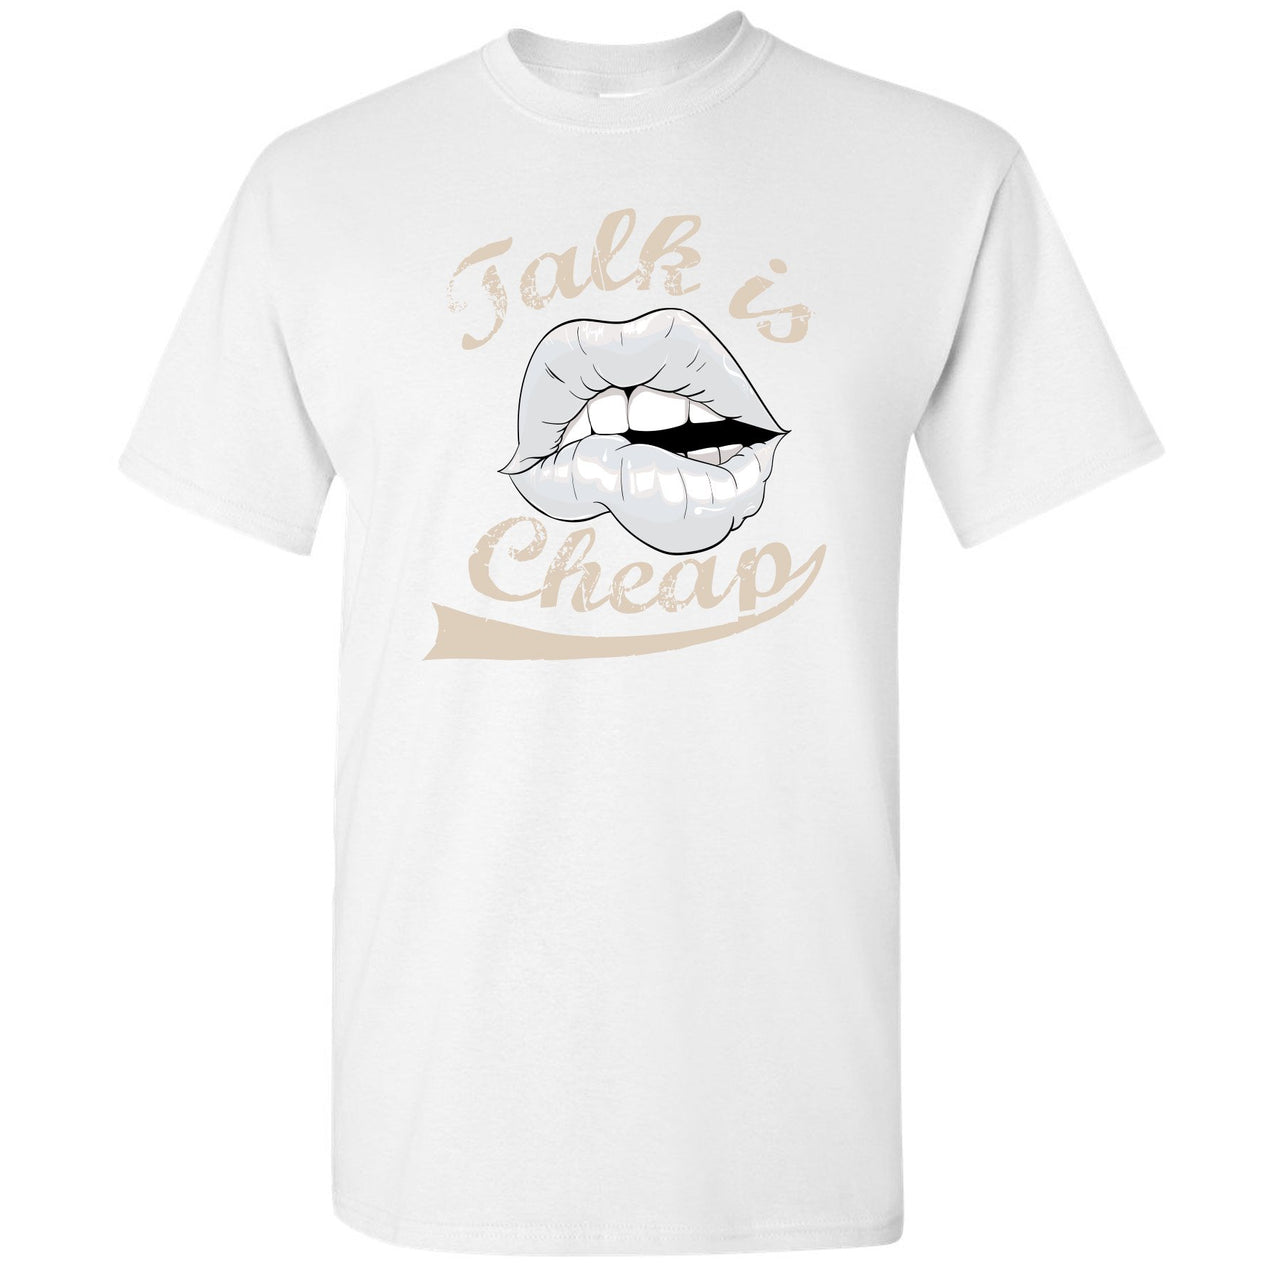 Hyperspace 350s T Shirt | Talking Lips, White